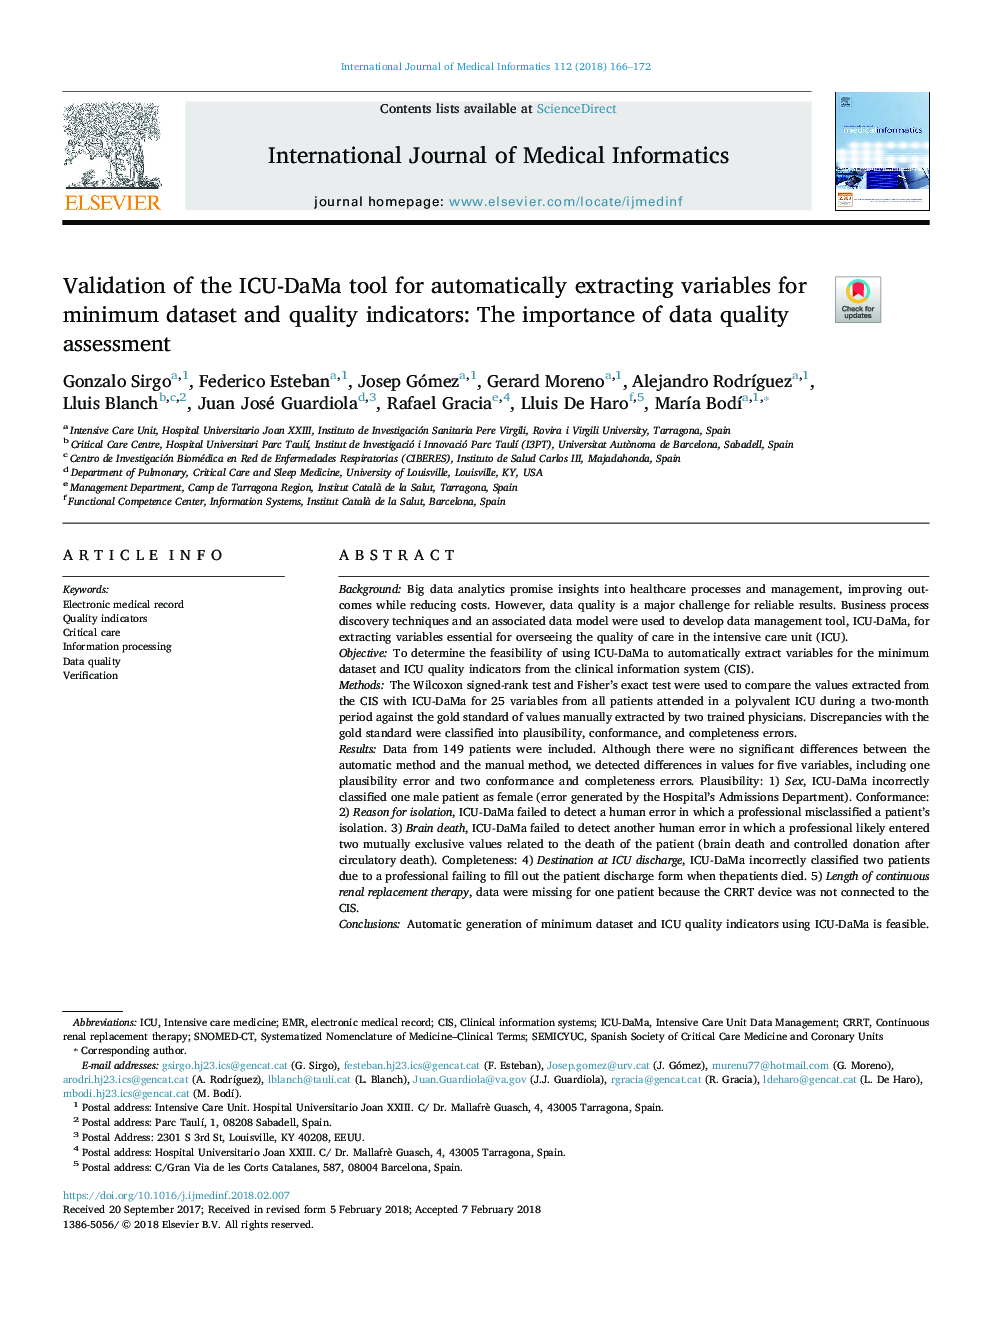 Validation of the ICU-DaMa tool for automatically extracting variables for minimum dataset and quality indicators: The importance of data quality assessment